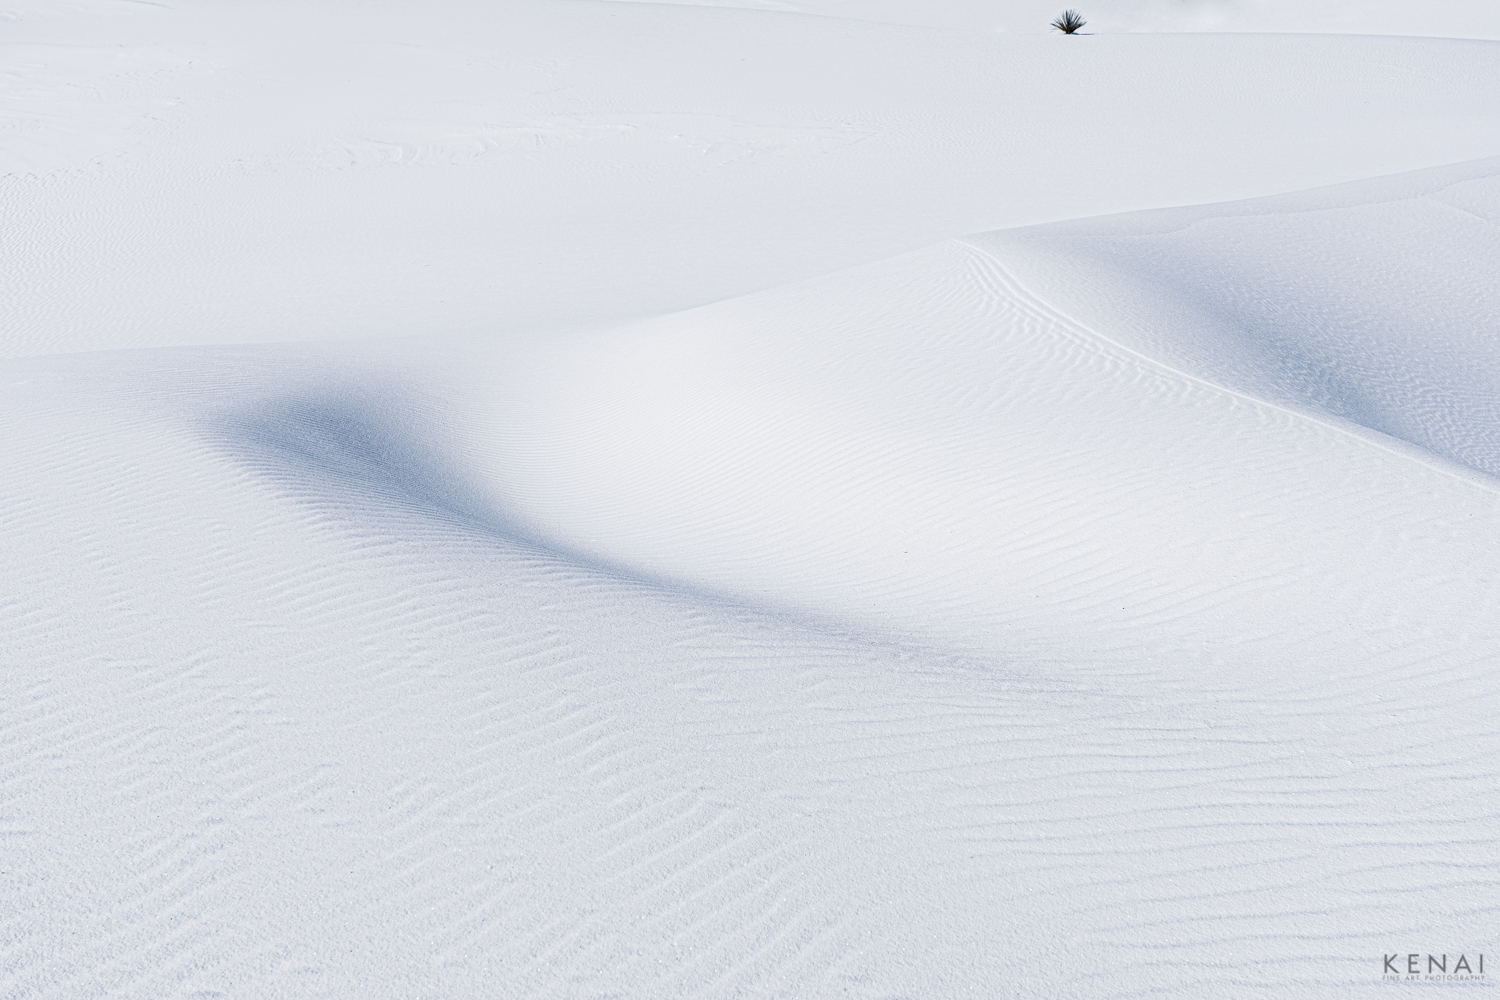 Minimalist image of sand dunes and a yucca plant in White Sands National Park, New Mexico.